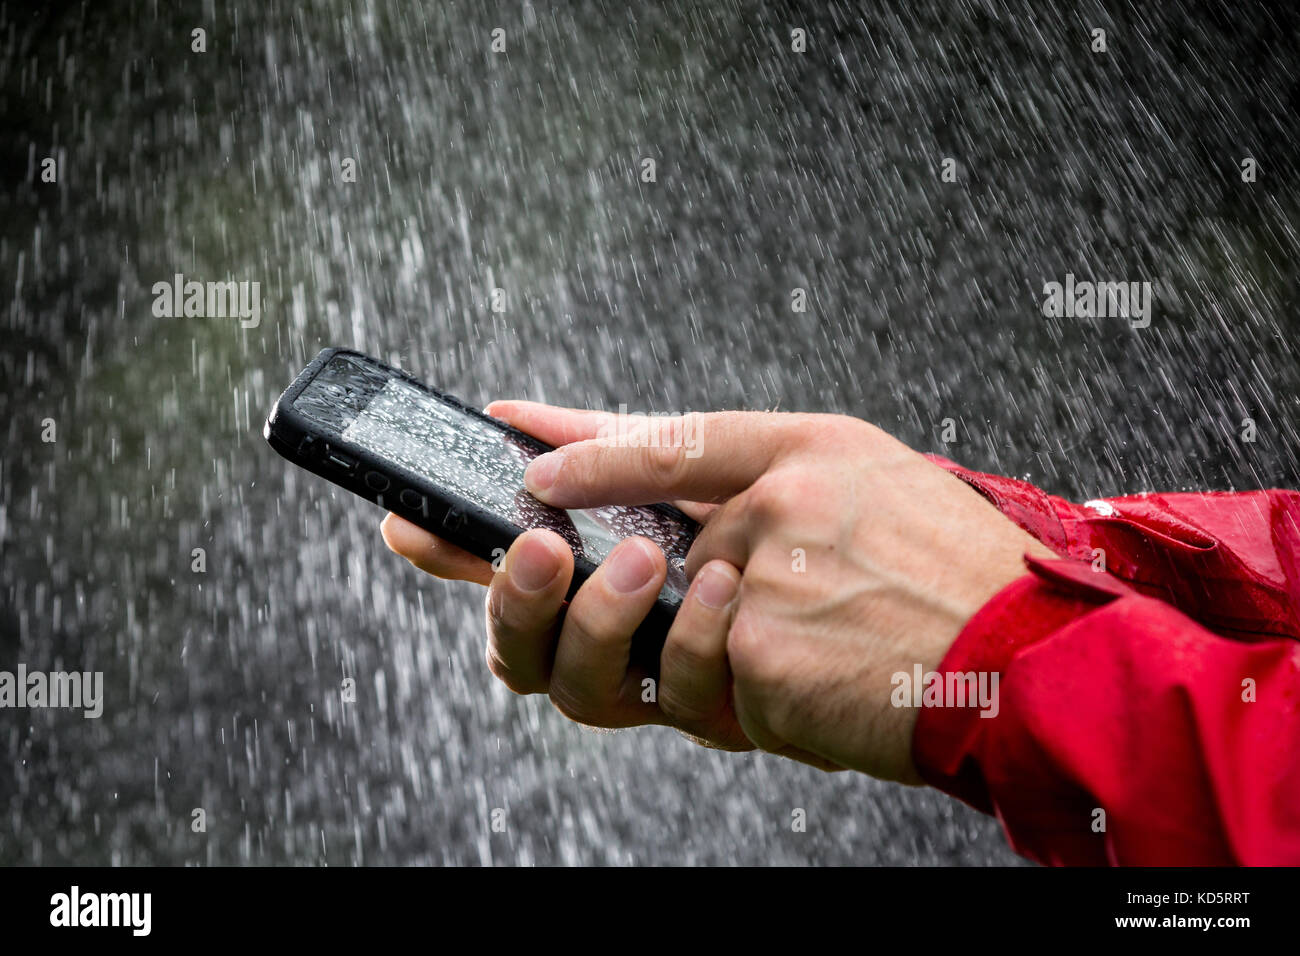 A man using a mobile phone in a waterproof case outside in the rain Stock Photo